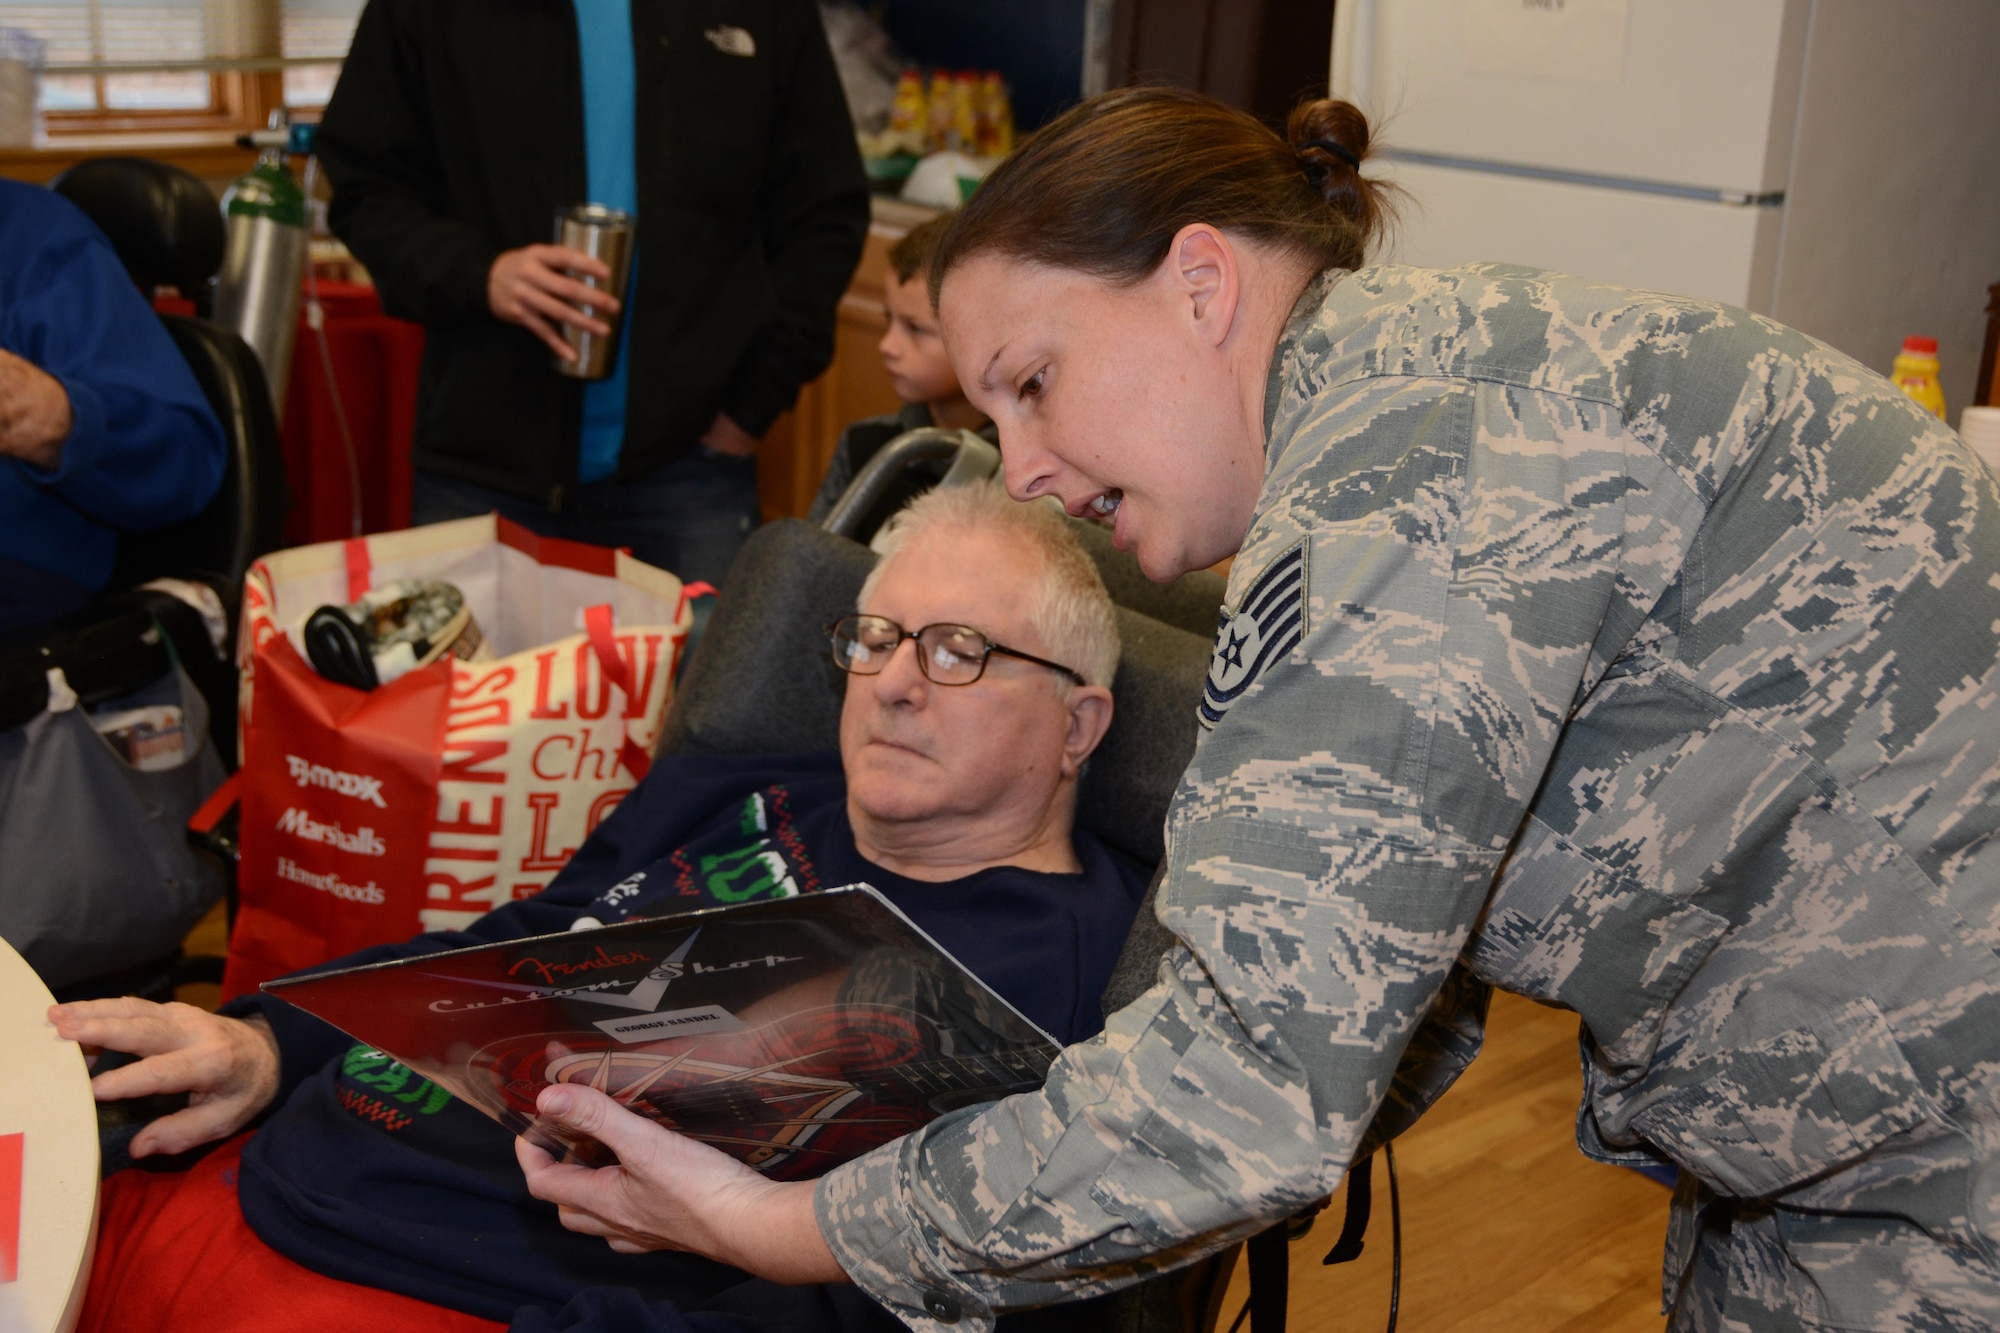 Tech. Sgt. Stephanie Heath, 507th Mission Support Group administrative assistant, shows a Veteran one of his Christmas gifts during the annual Norman Veterans Center Christmas Party at the Norman Veterans Center in Norman, Okla., Dec. 22, 2016. This year marked the 21st year that the 507th Air Refueling Wing has participated in the annual Christmas party at the center. (U.S. Air Force photo/Maj. Jon Quinlan)